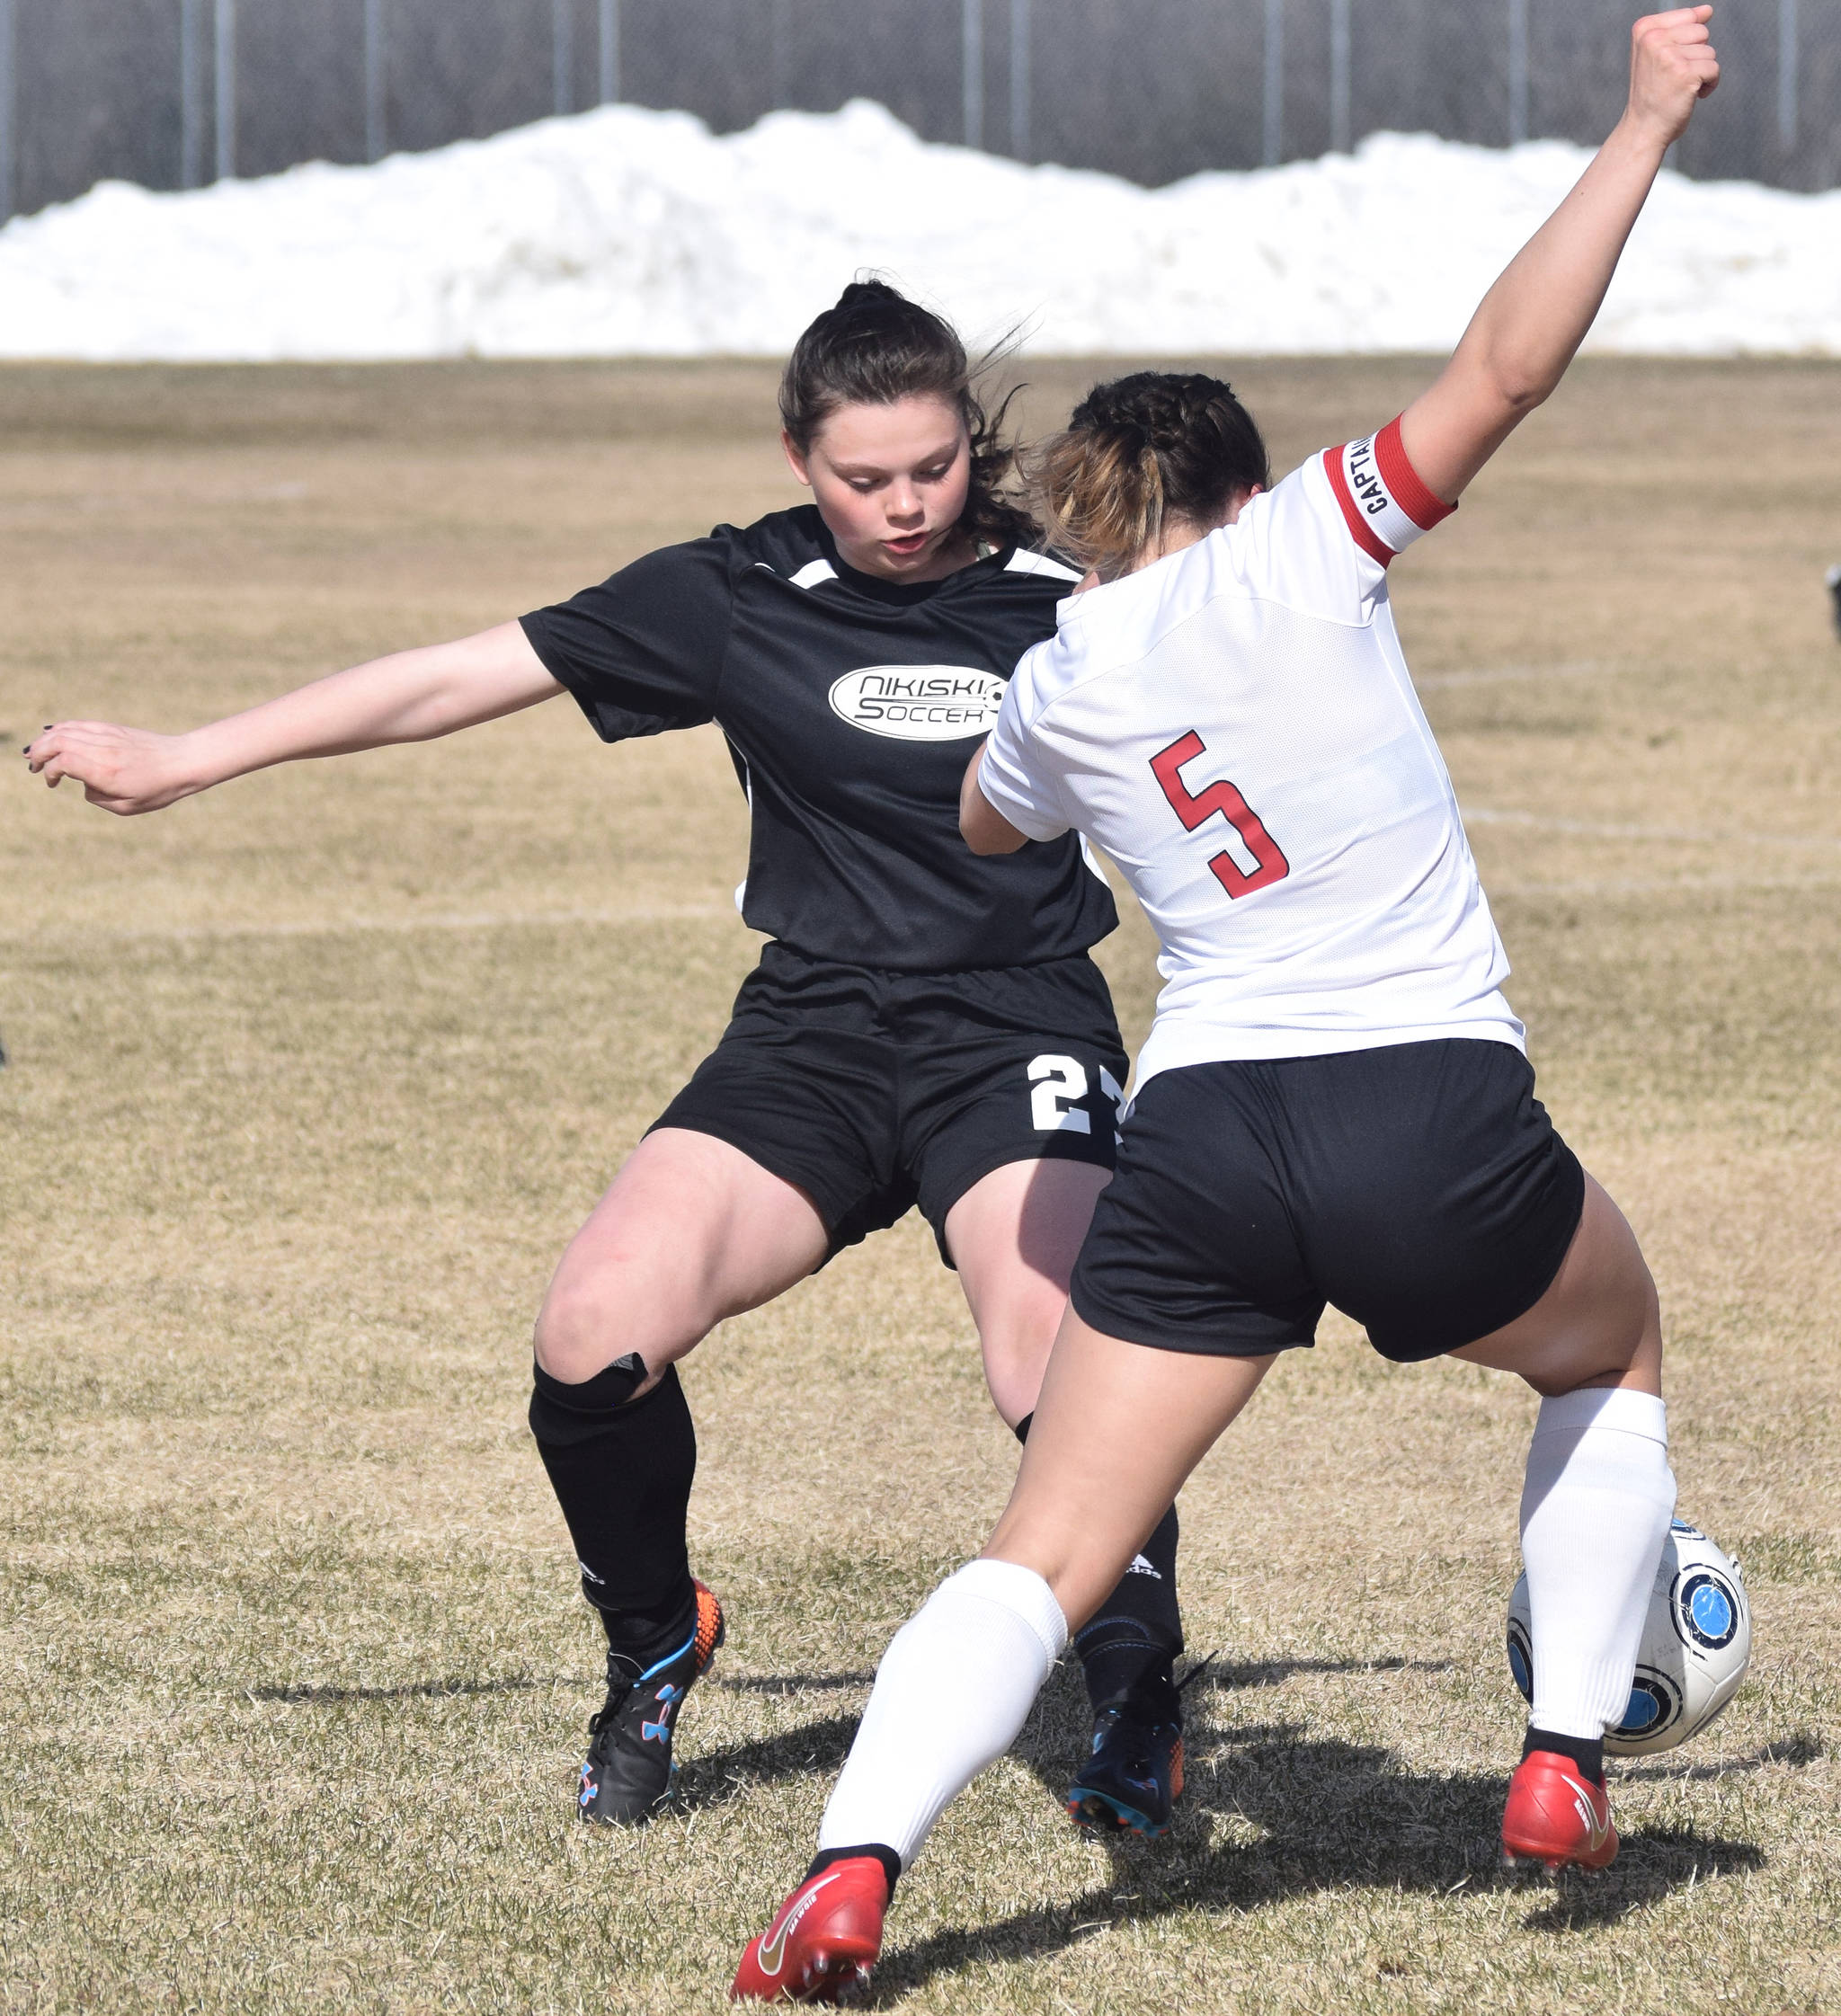 Nikiski’s Tawnisha Freeman (left) goes for a steal of the ball on Kenai’s Alissa Maw in a Peninsula Conference game Tuesday, April 30, 2019, at Nikiski High School. (Photo by Joey Klecka/Peninsula Clarion)